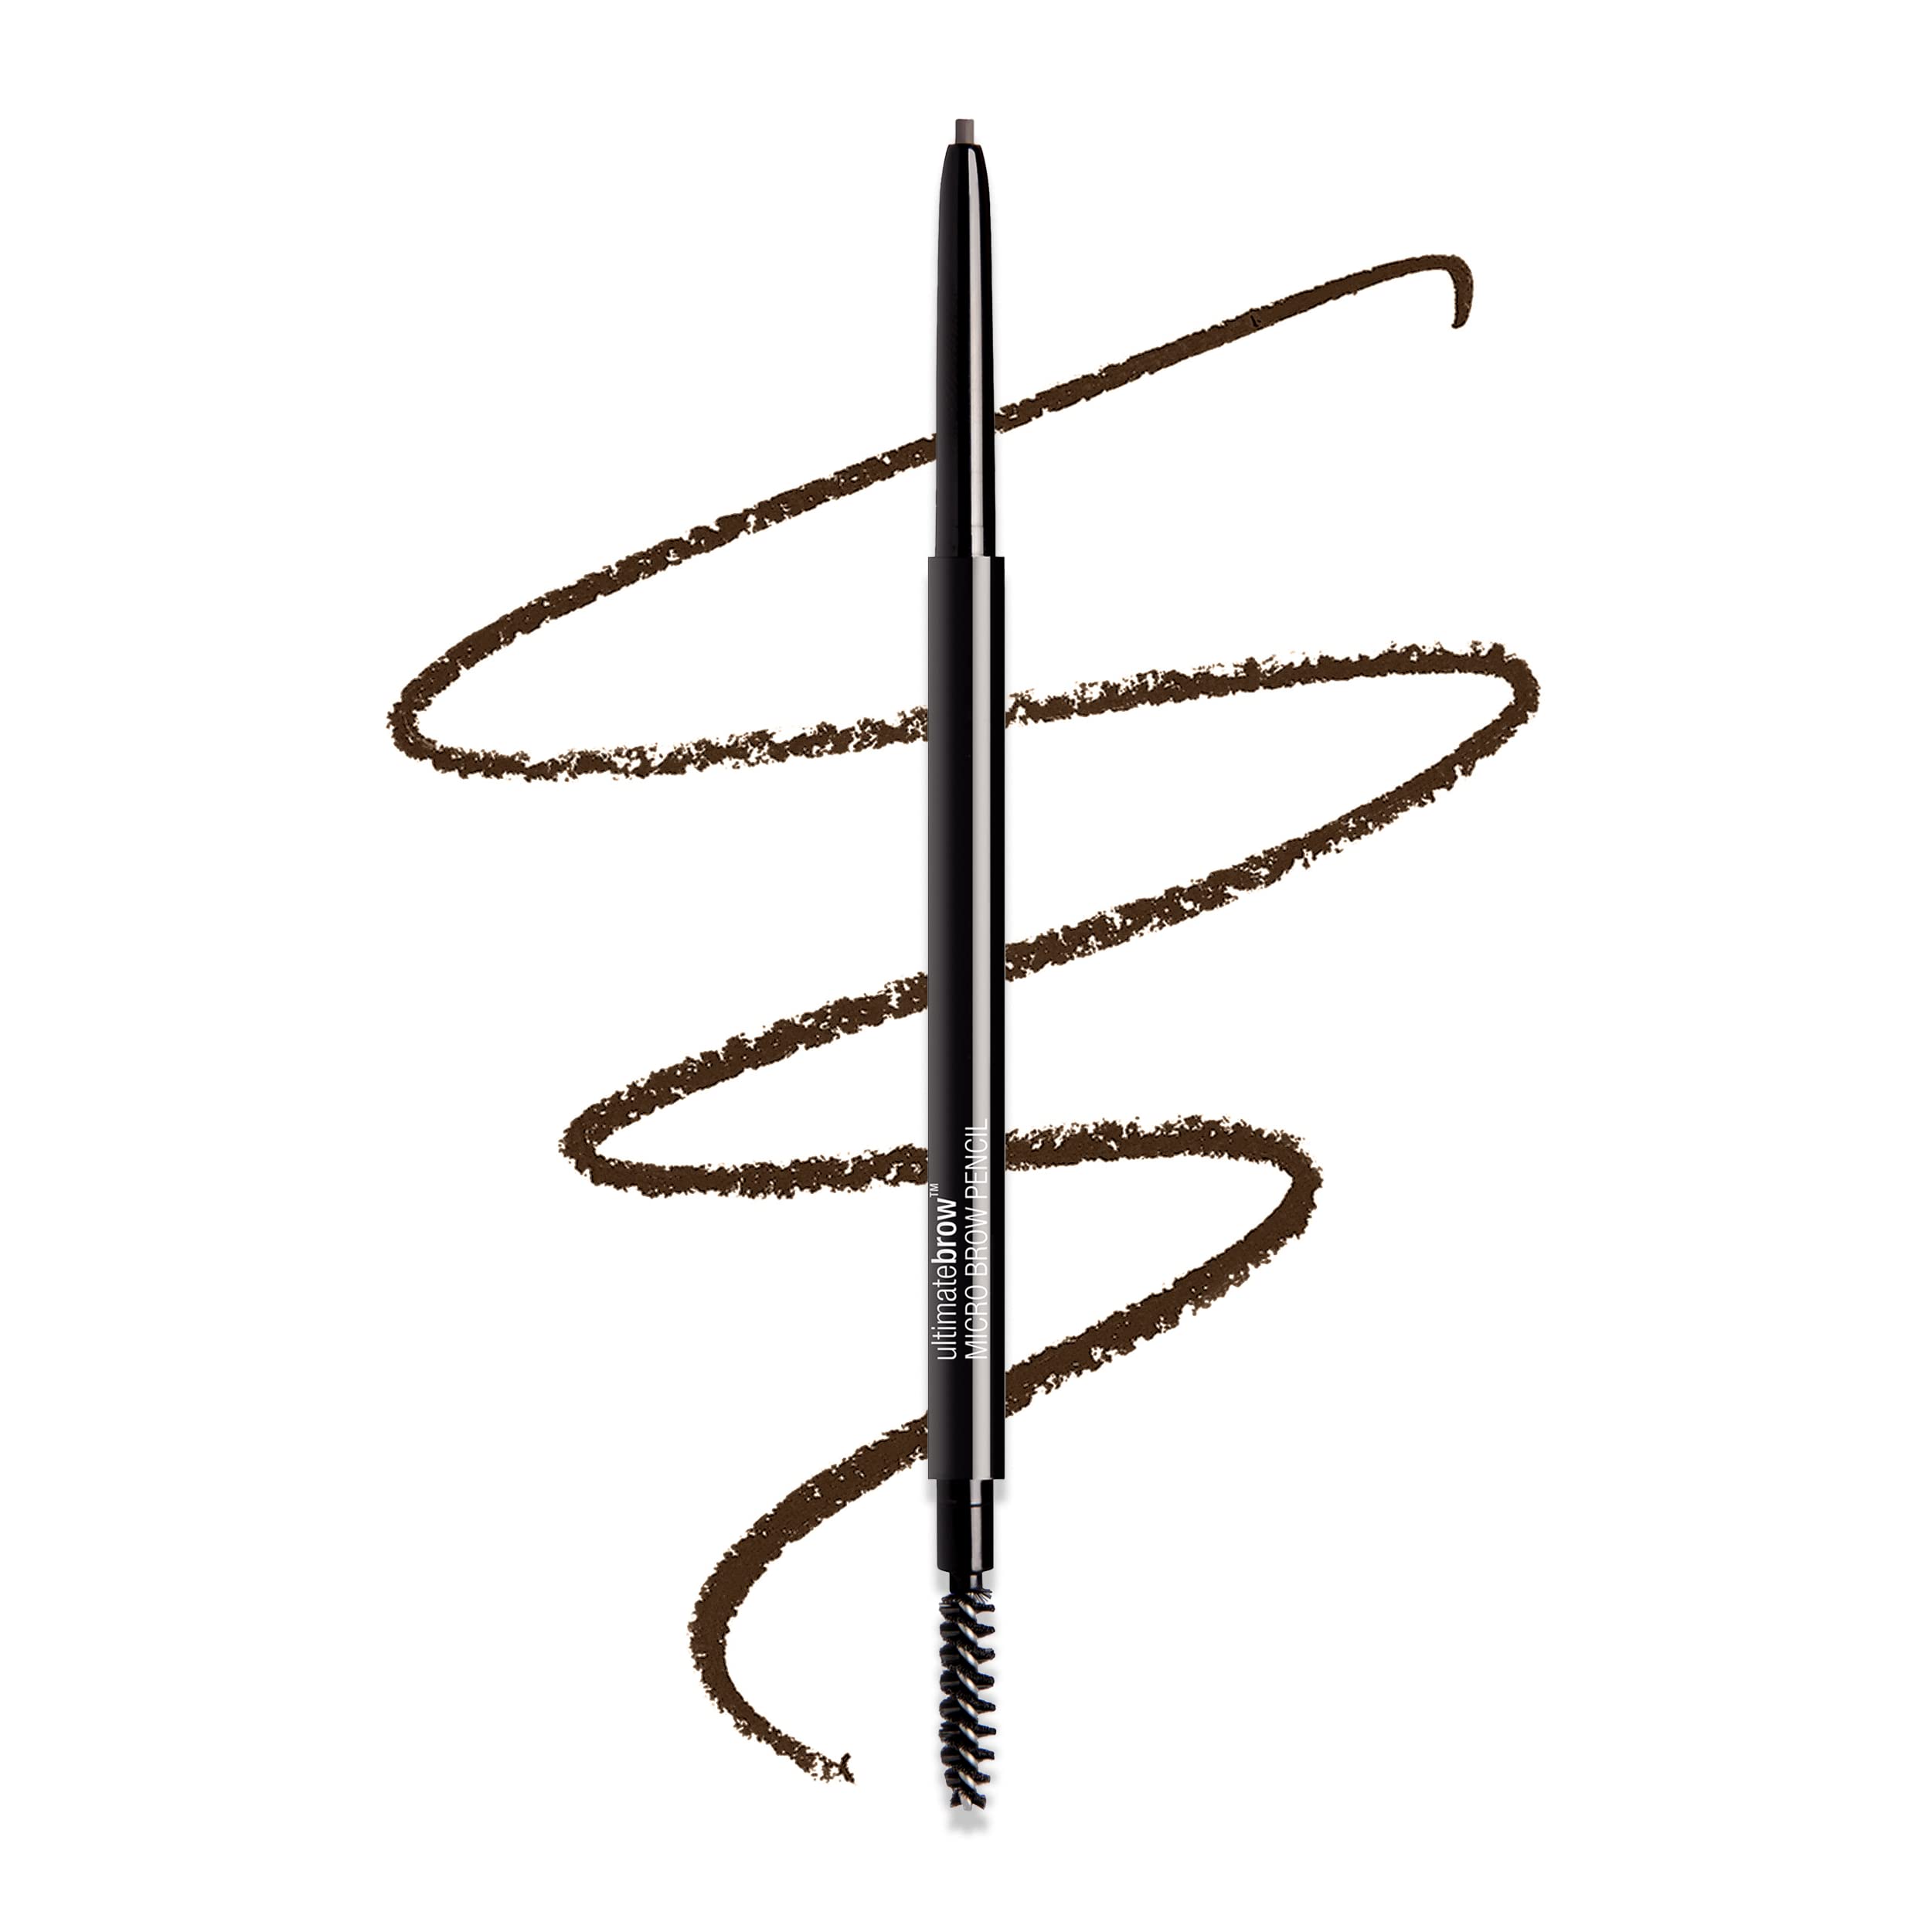 Wet n Wild Ultimate Brow Micro Eyebrow Retractable Pencil, Dark Brown, Ultra Fine 1.5mm Tip, Draws Tiny Brow Hairs